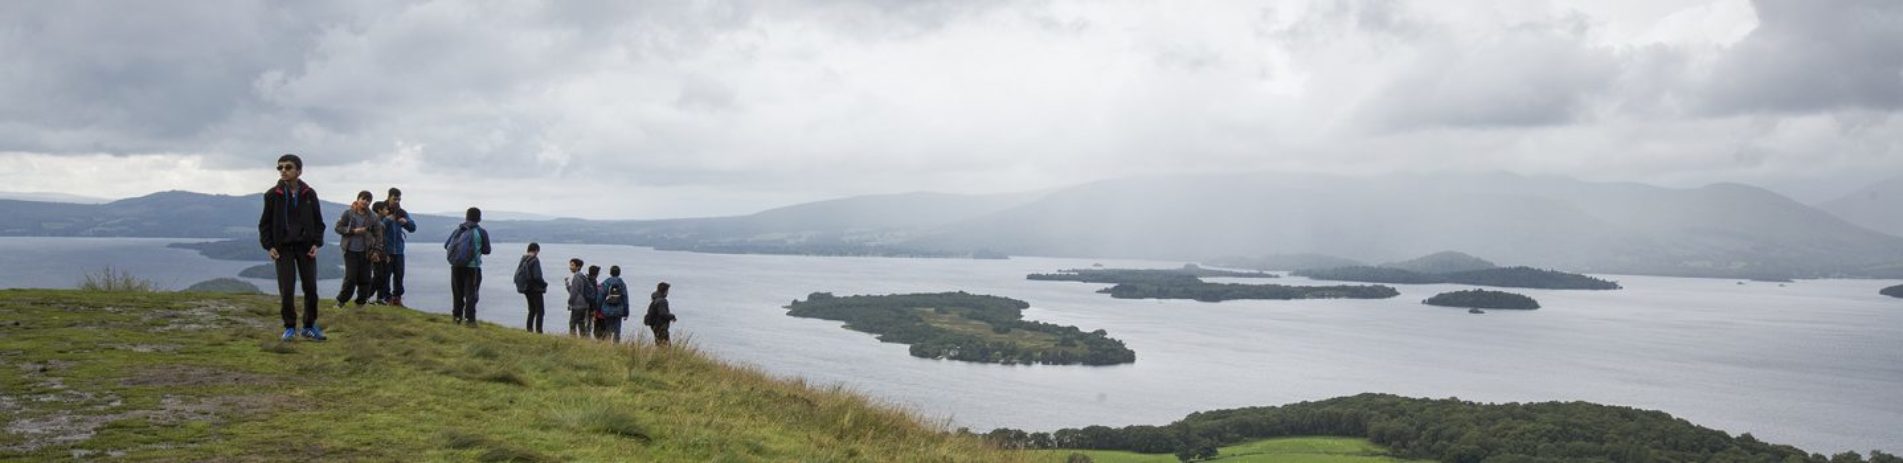 group-of-boys-on-conic-hill-with-stunning-view-of-loch-lomond-and-islands-dark-clouds-above